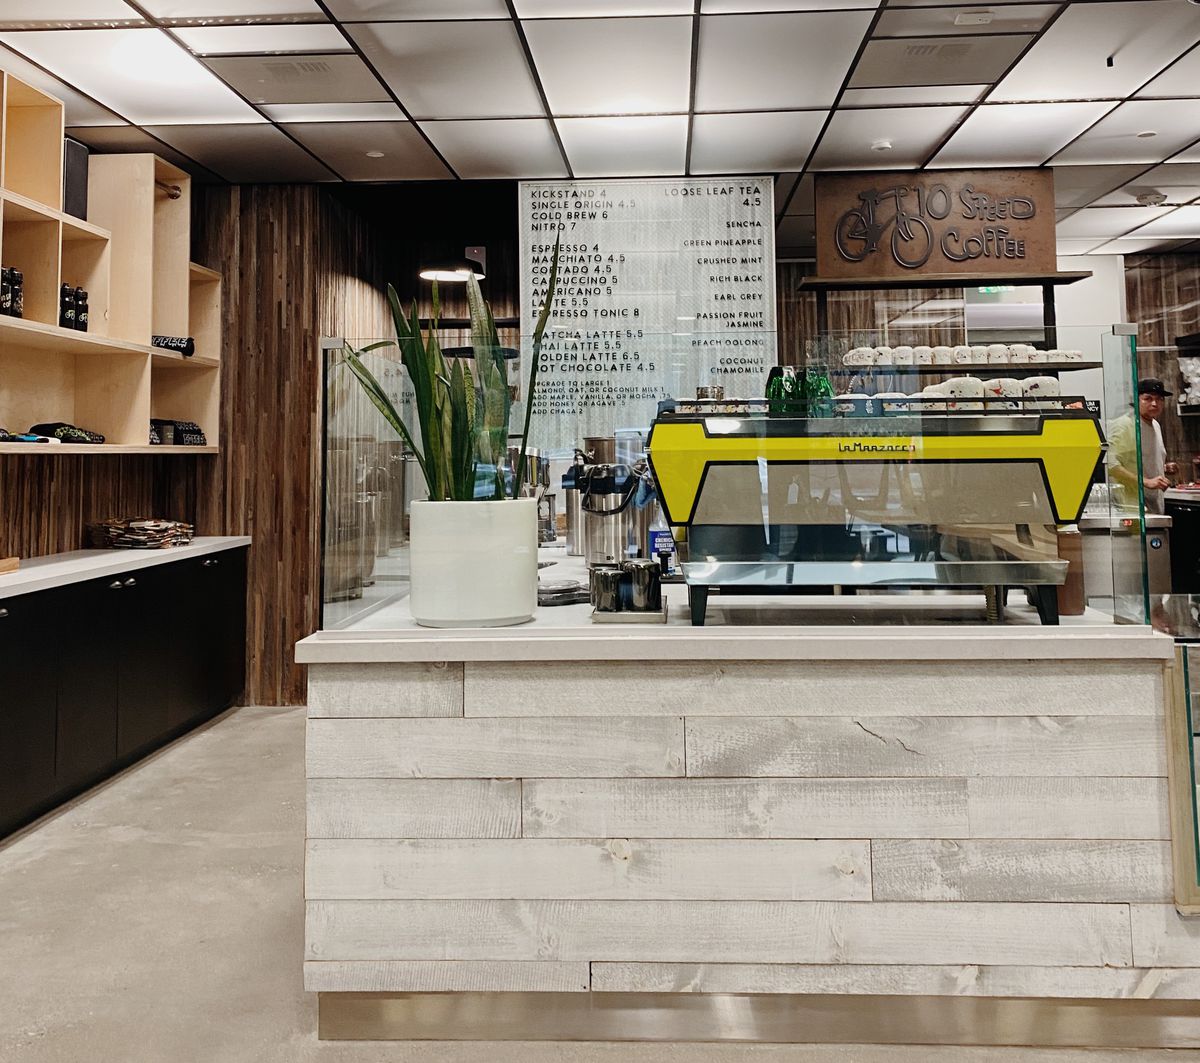 A close up look at a yellow espresso machine inside a grey and tan coffee shop.